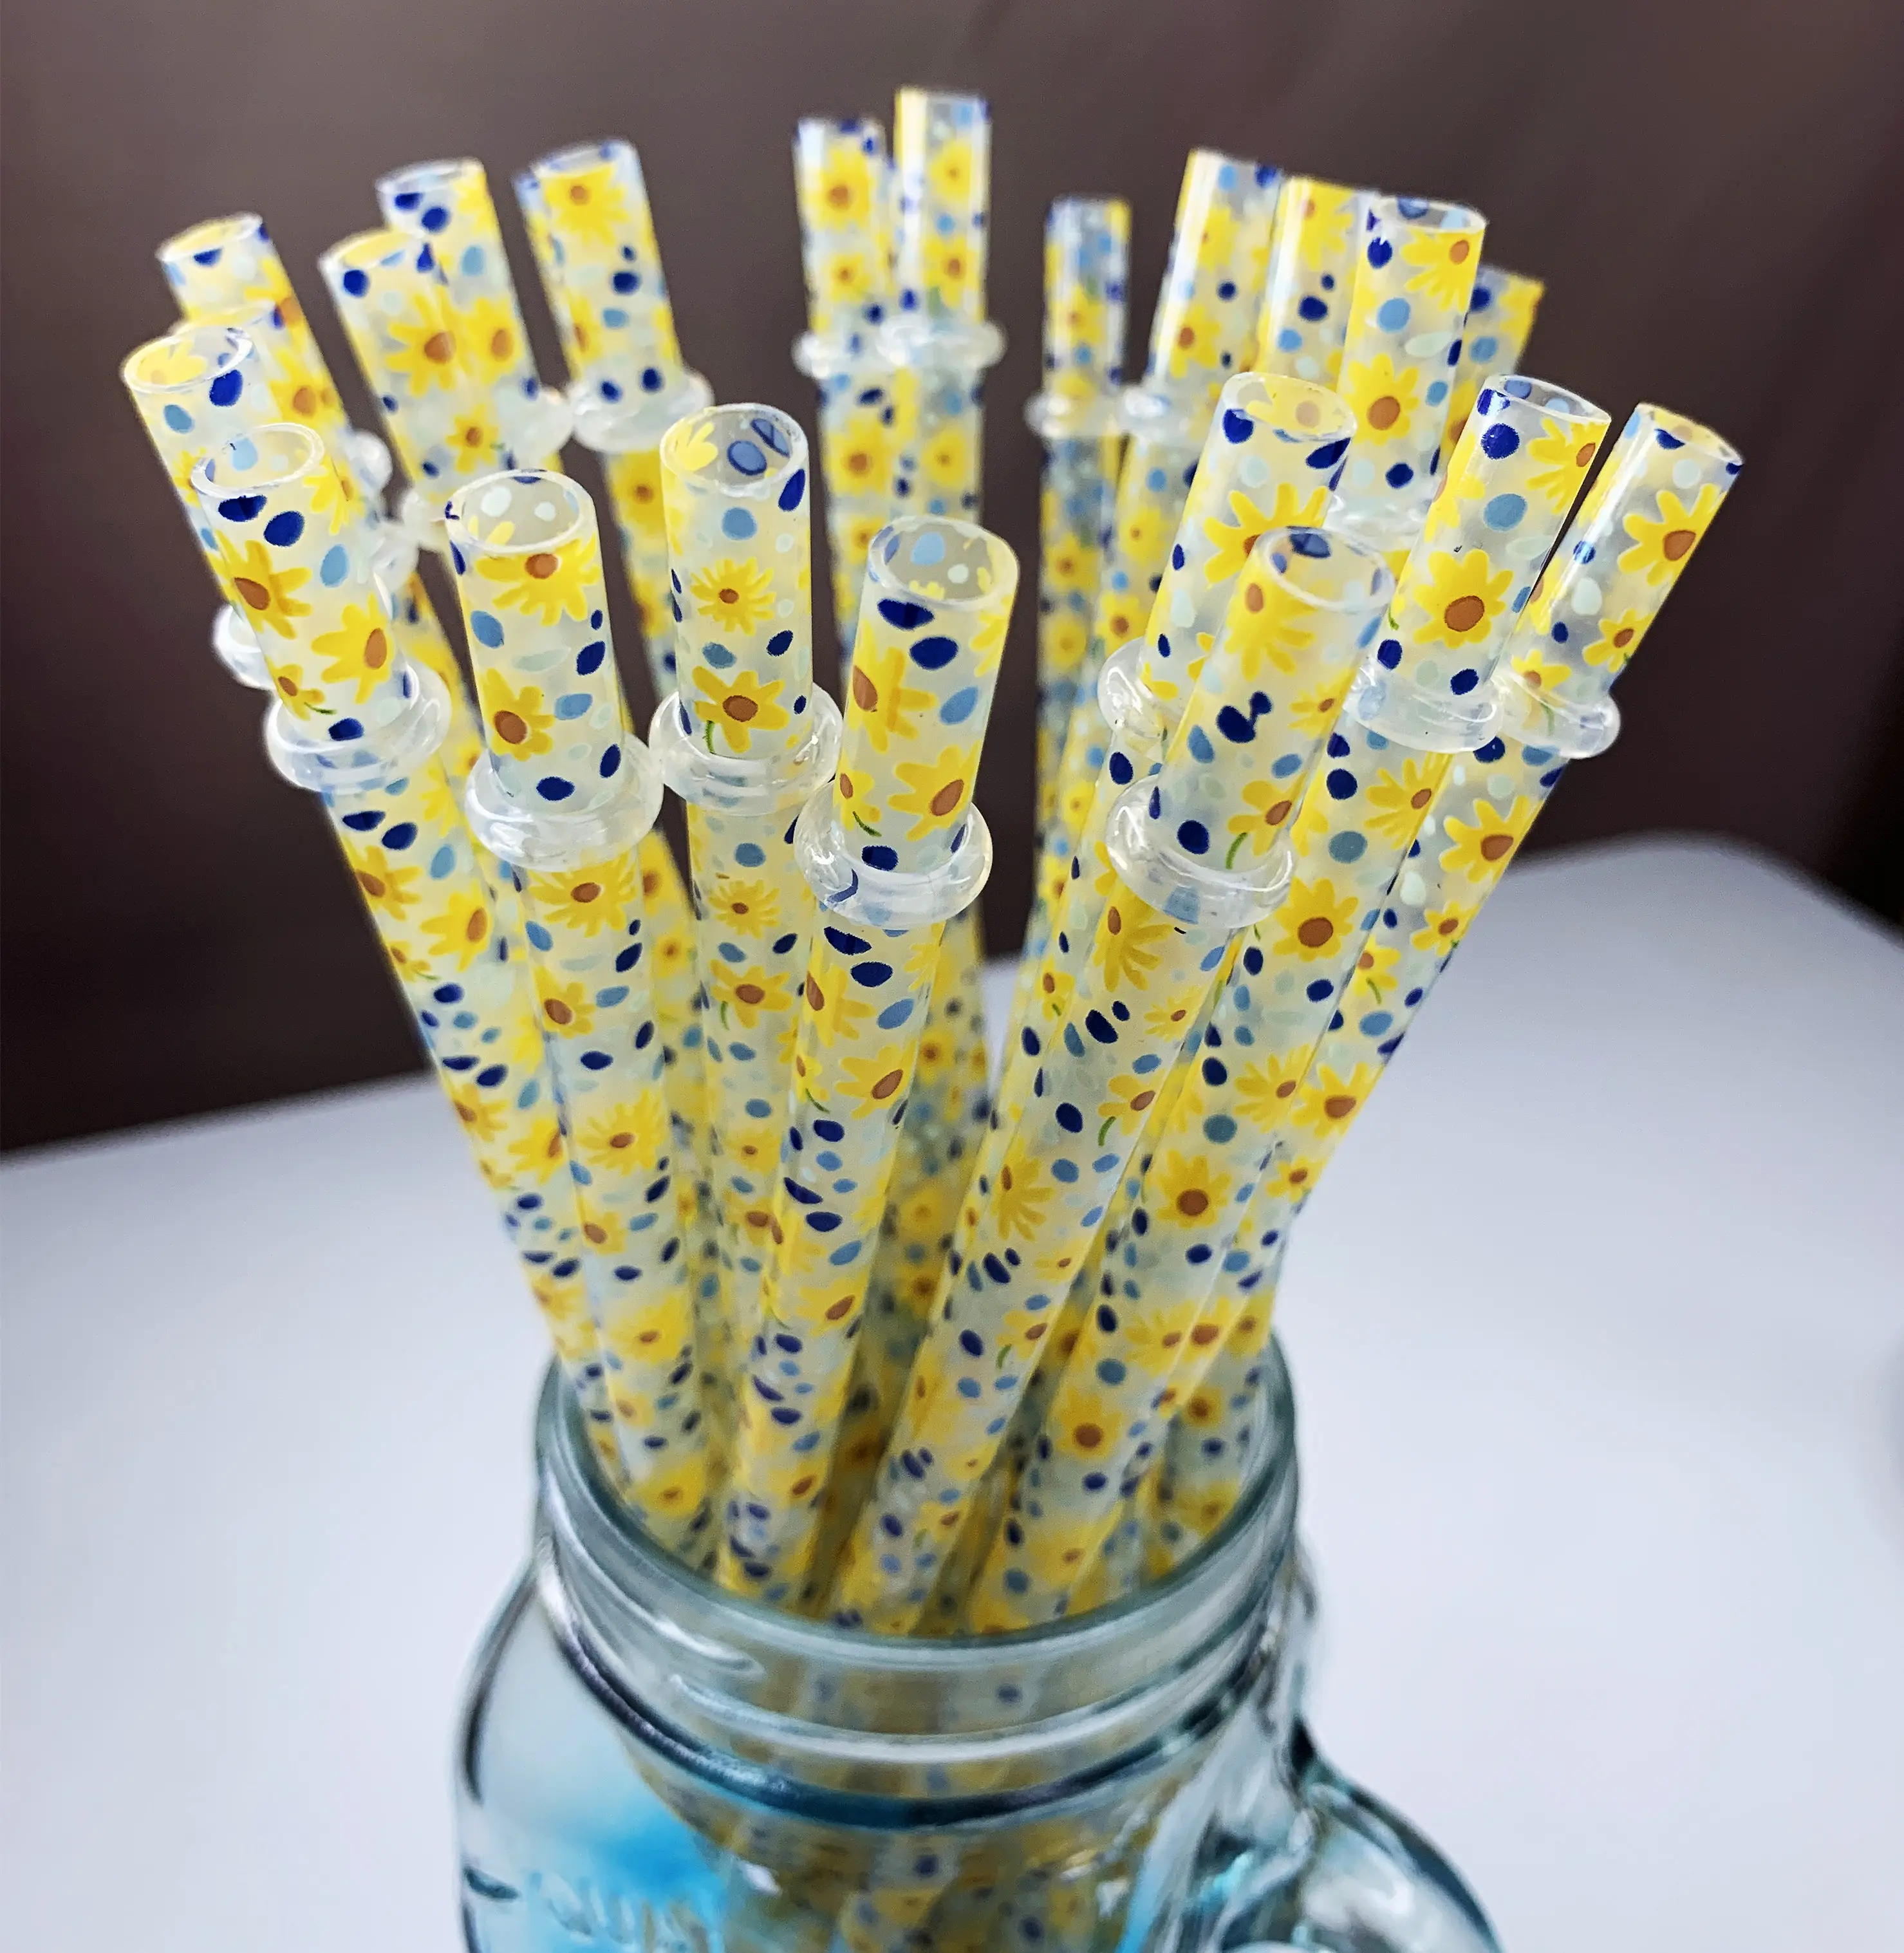 25Pcs/Bag Latest Promotion Price Eco-friendly Reusable Drinking Straw PP Hard Plastic Printing Sunflower Straw